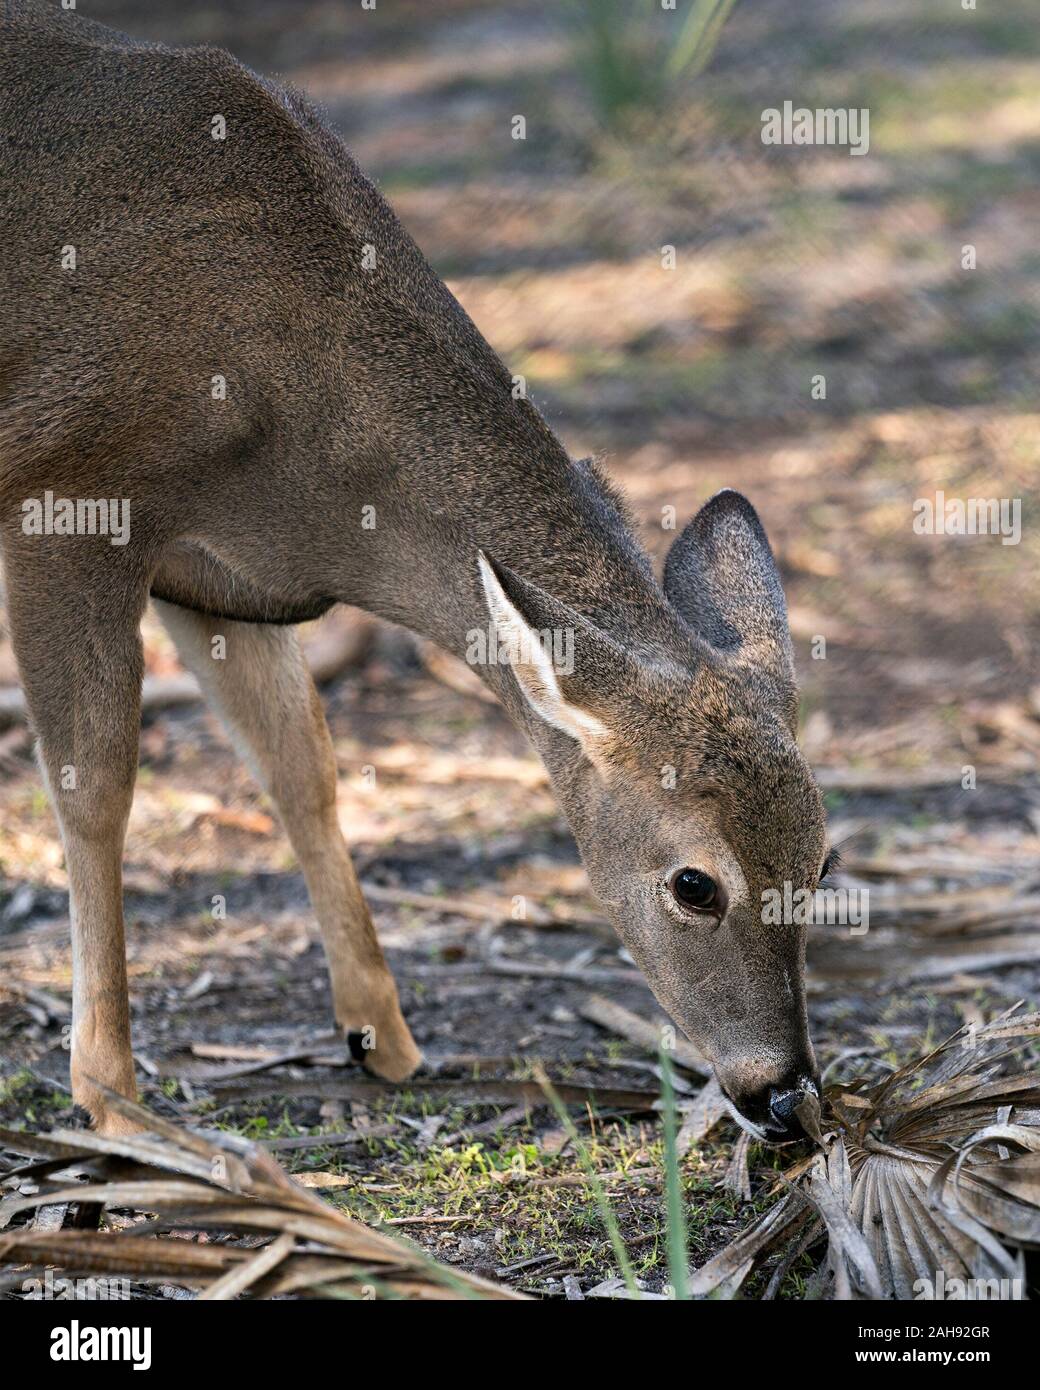 Deer White Tailed Deer close-up profile view walking in the field displaying brown fur, body, head, ears, eyes, nose, legs, with a bokeh background in Stock Photo